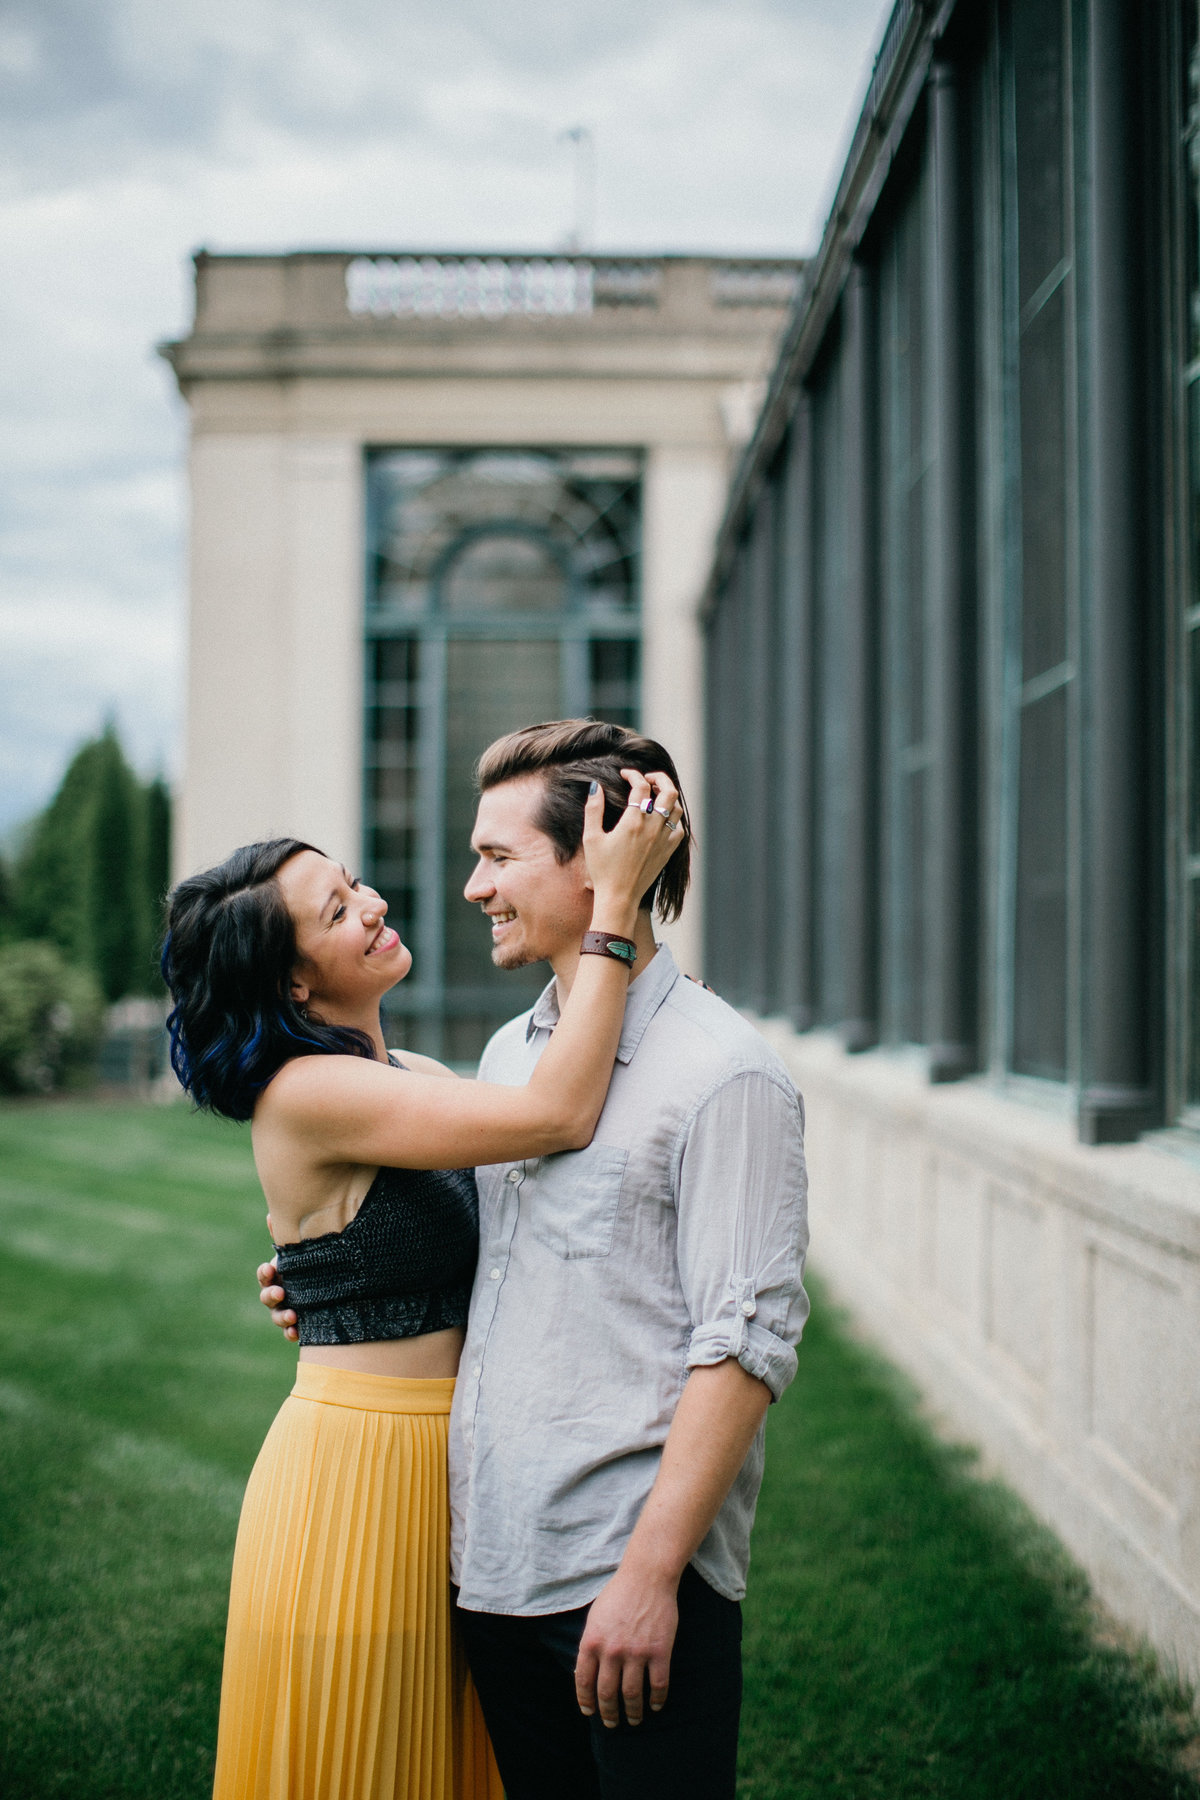 Fun couple shoot at Longwood Gardens in Kennett Square, photography by Sweetwater.